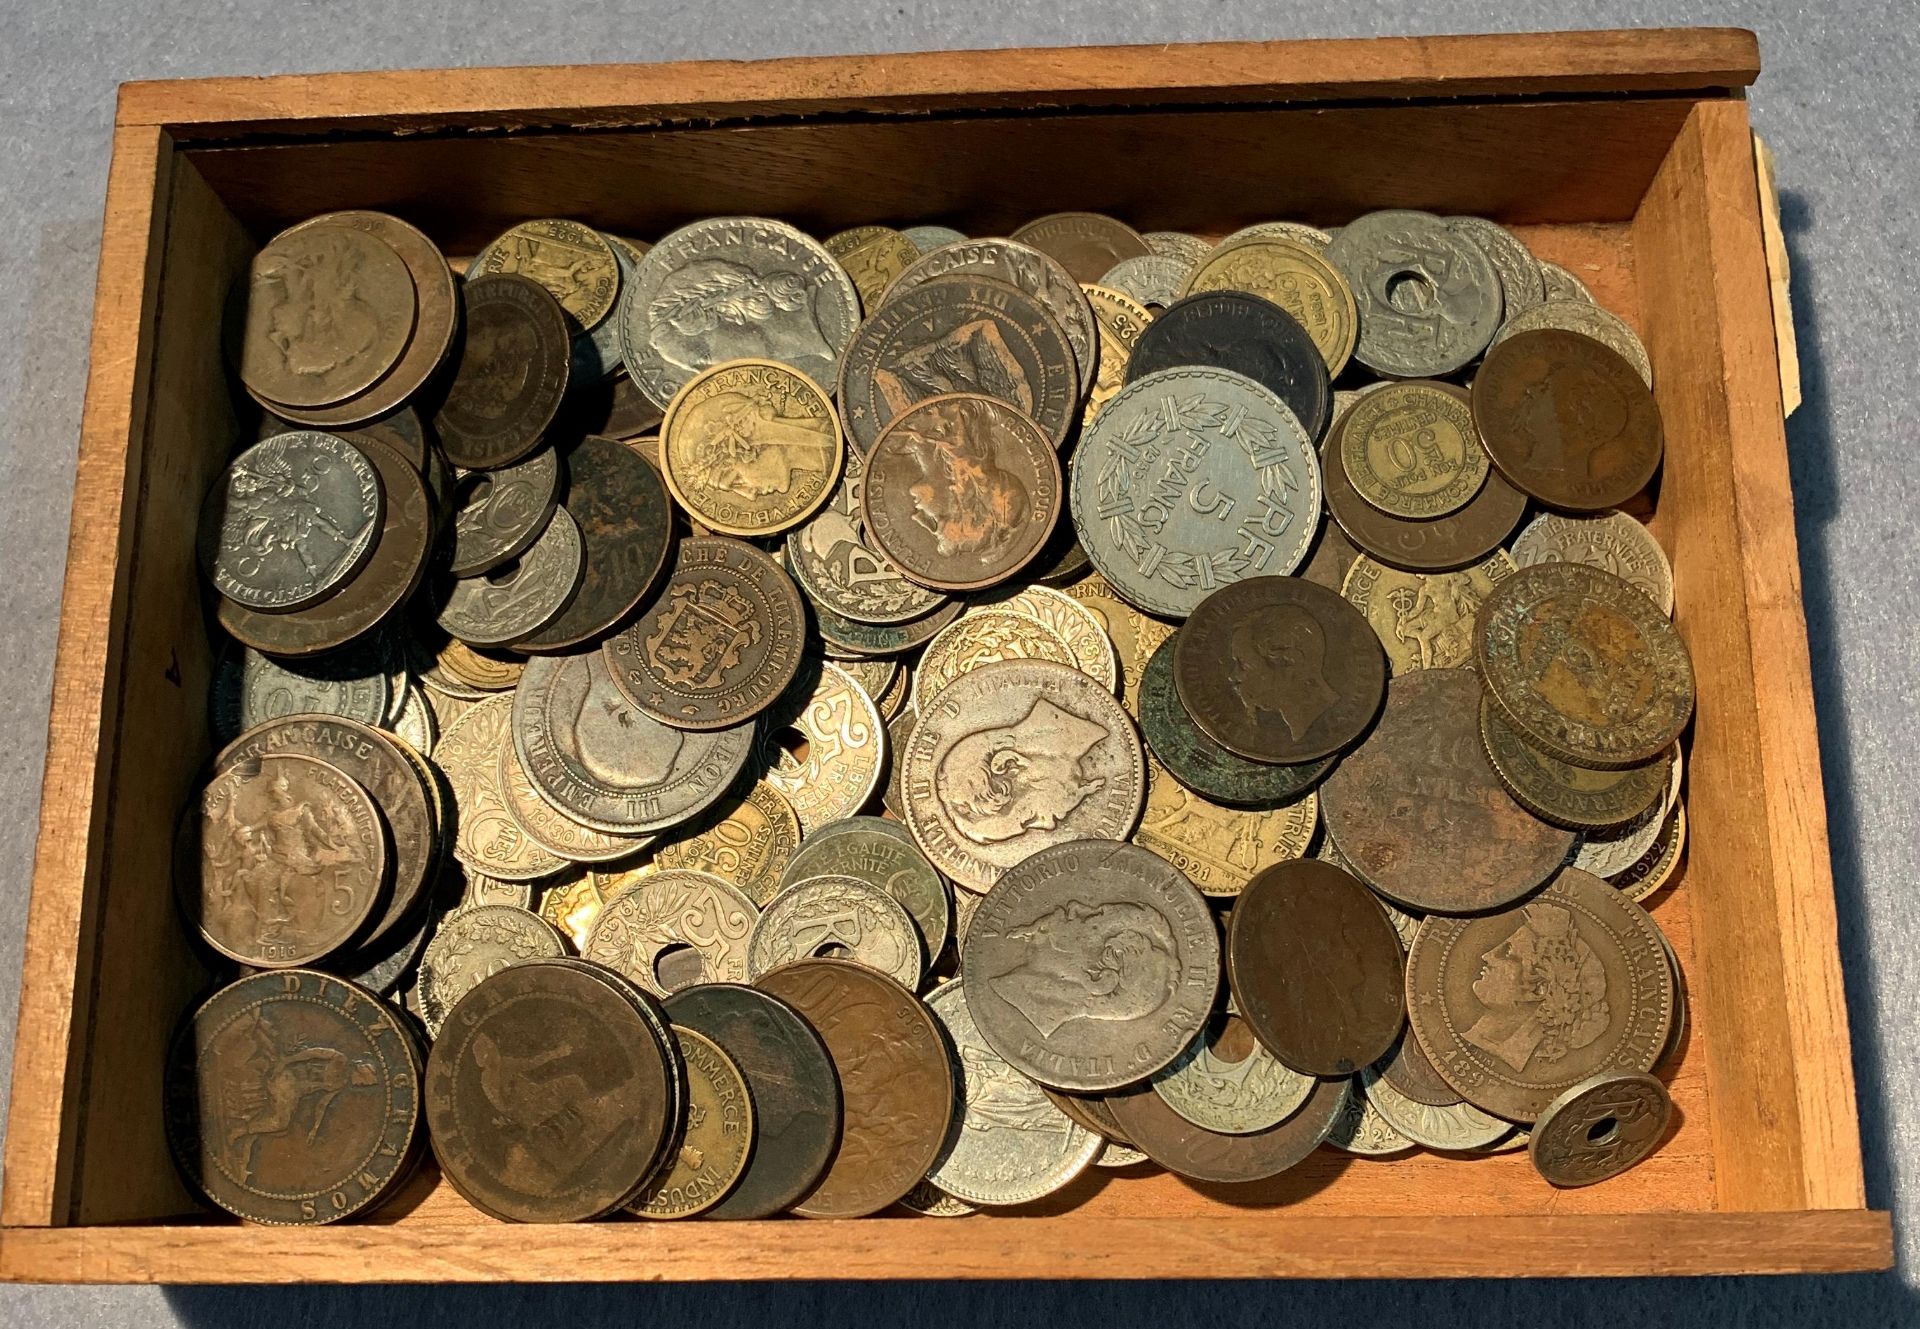 Contents to cigar box - French franc and centime coins,